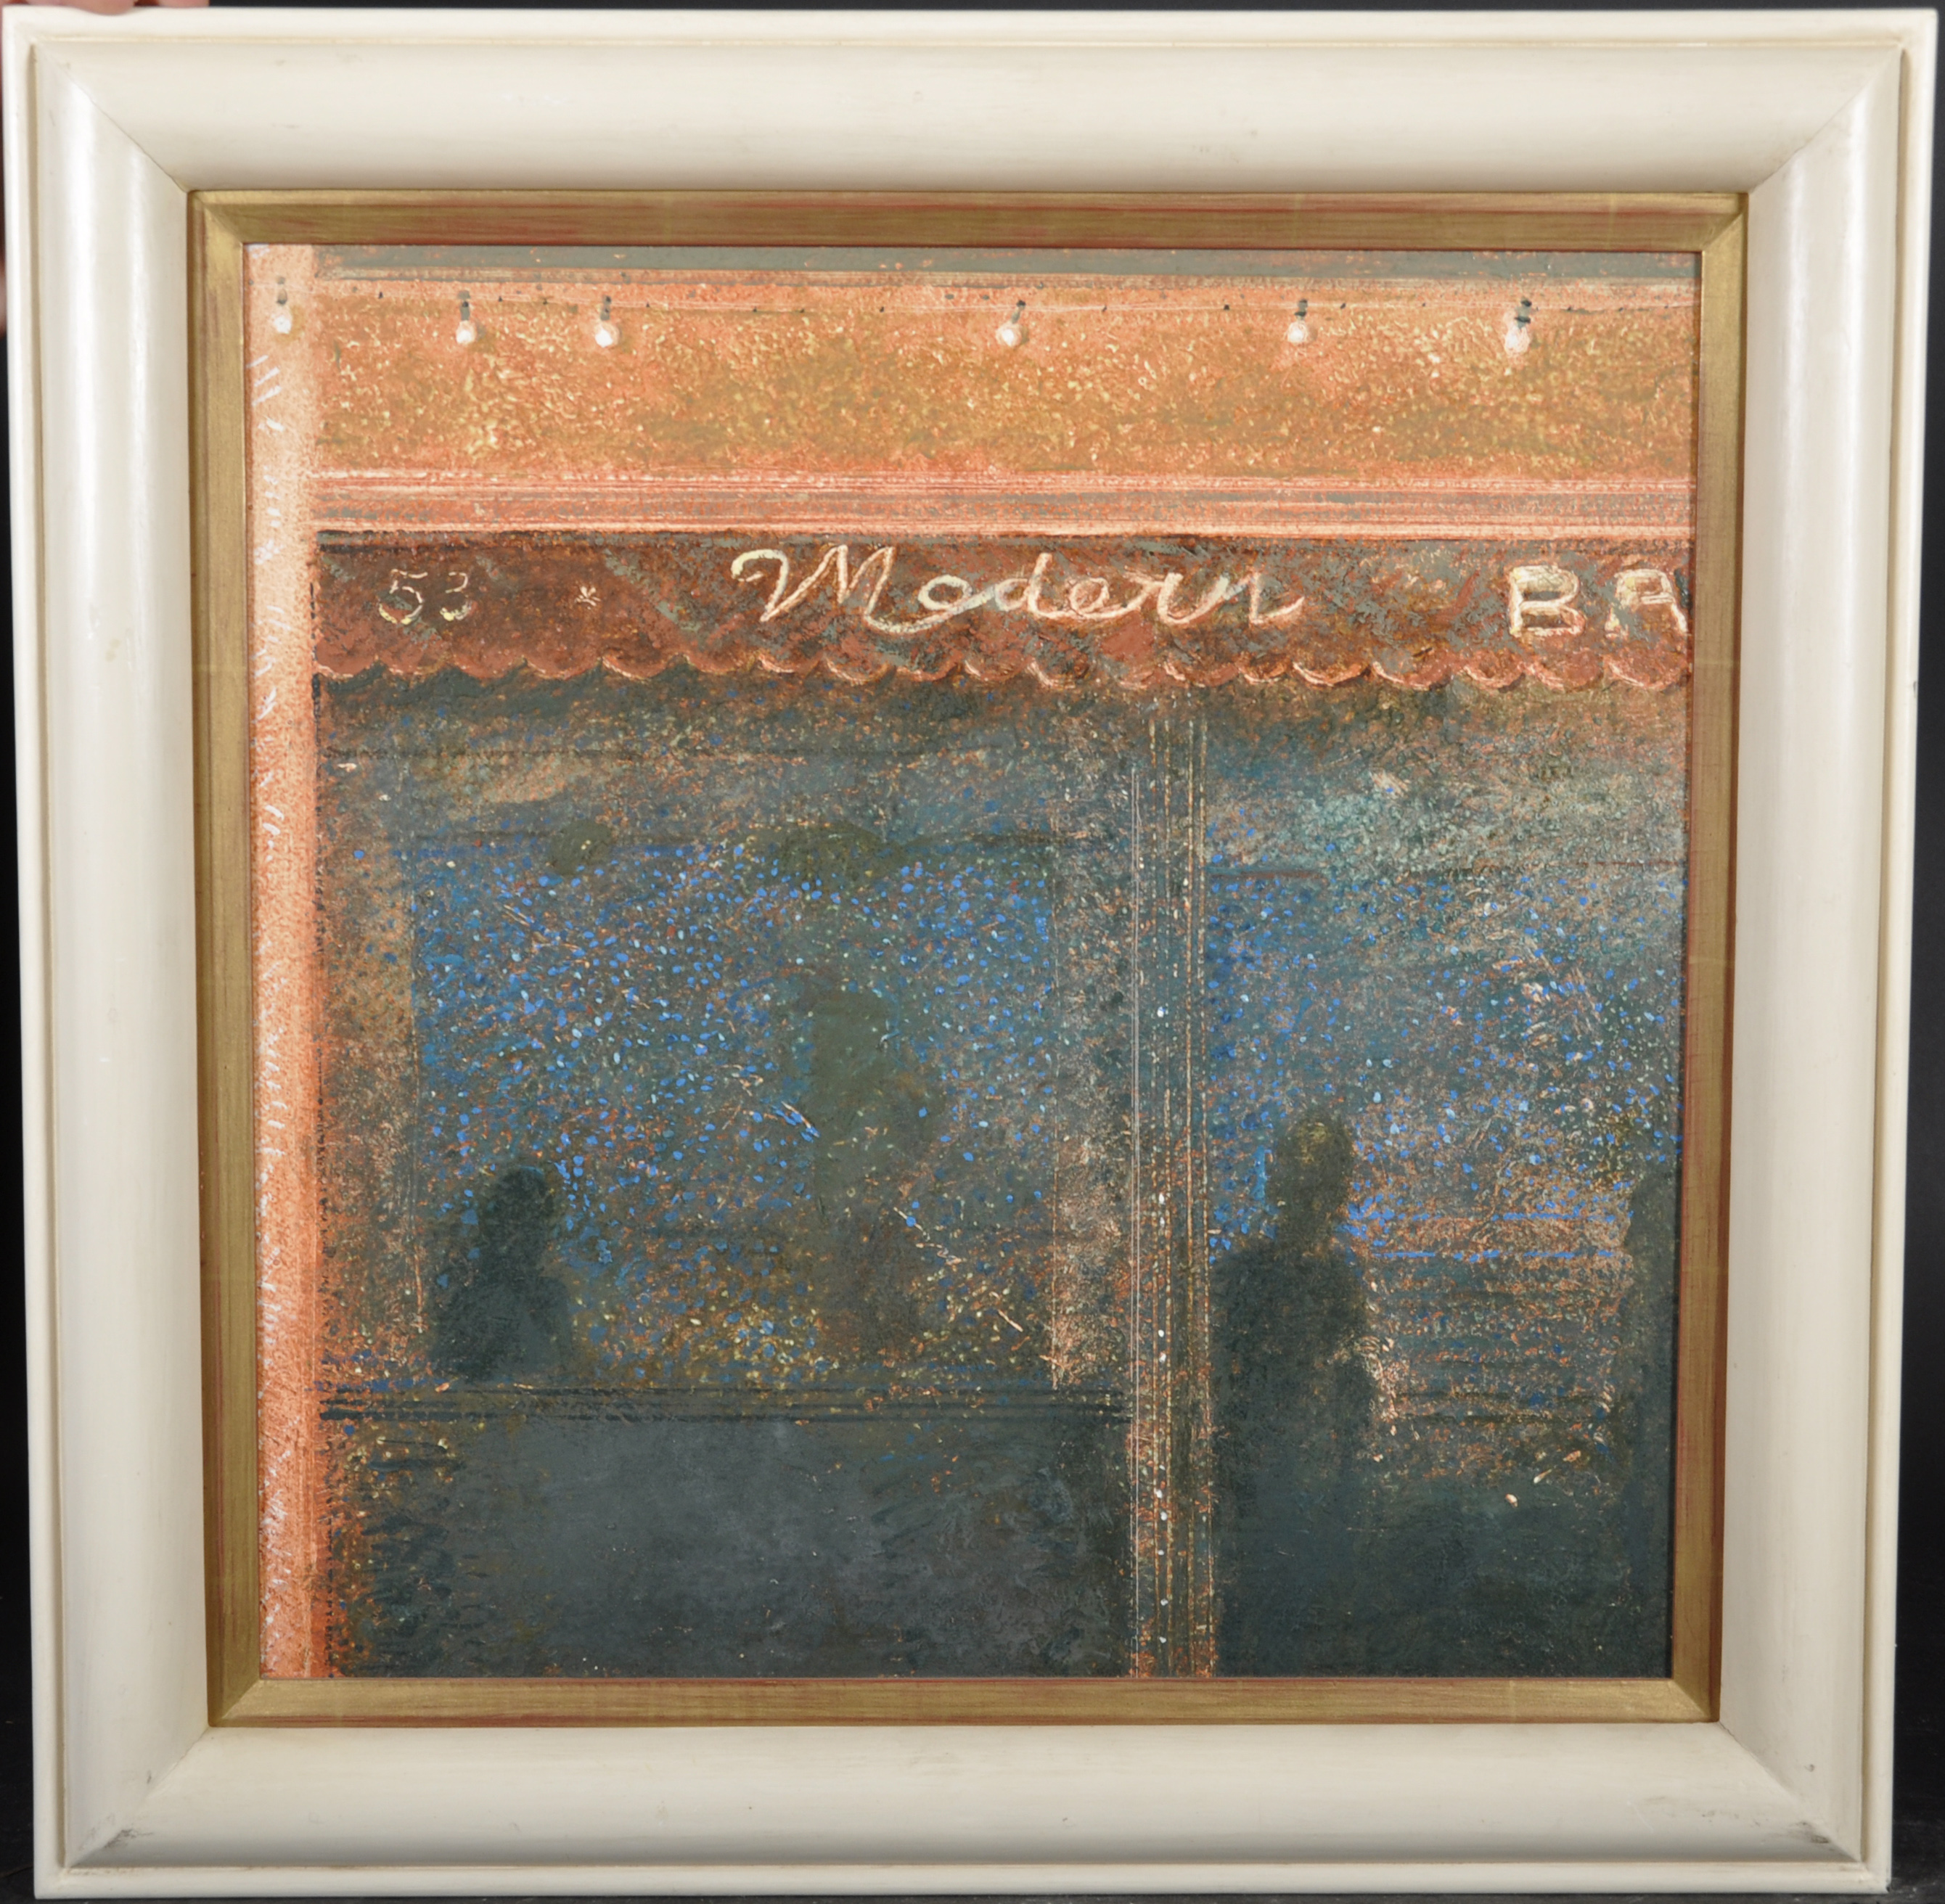 M... Peacock (20th Century) British. "Modern Bar", Oil on Board, Signed, Inscribed and dated 1991 on - Image 2 of 6